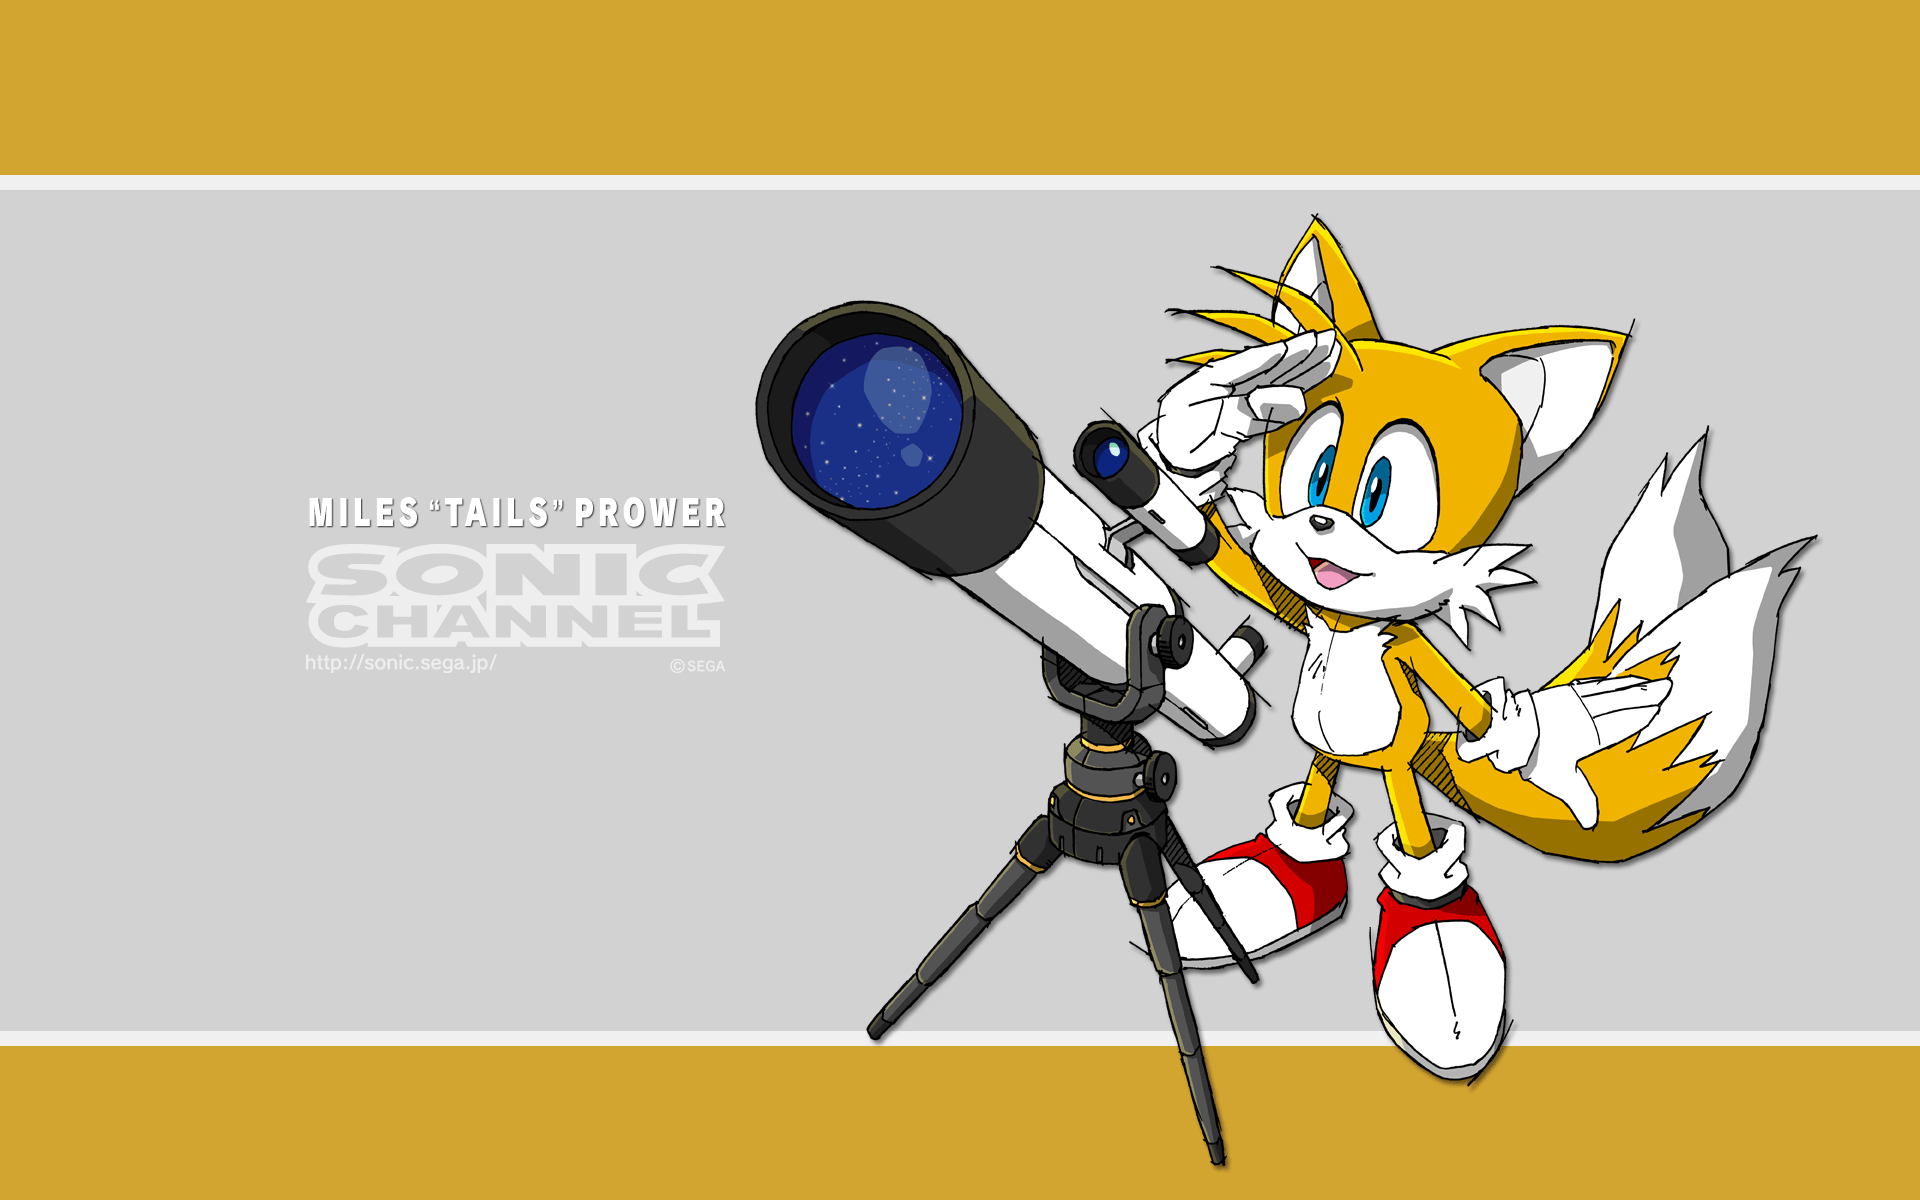 Miles “Tails” Prower (July 2014) Channel Wallpaper